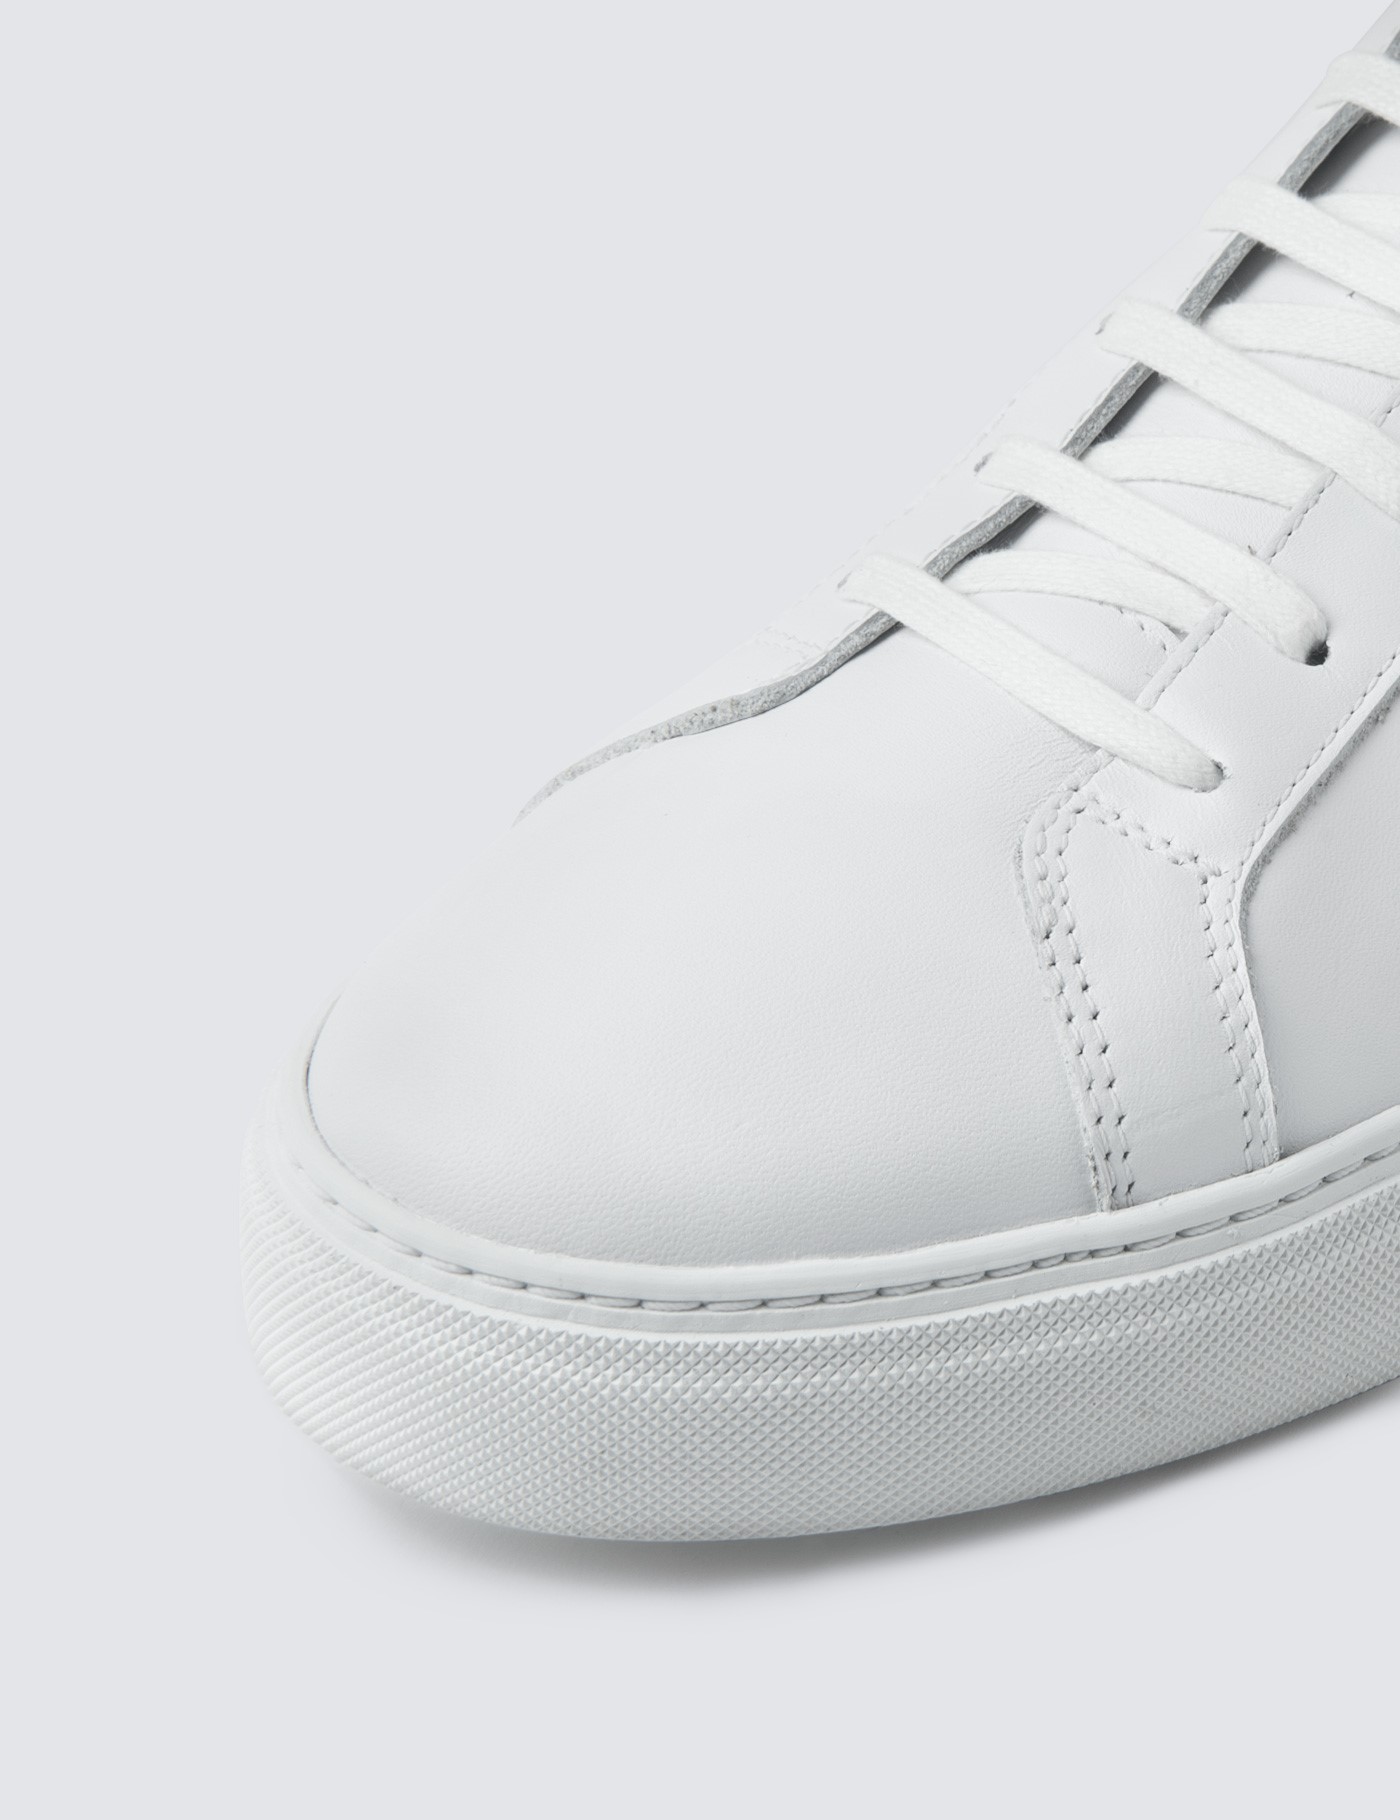 Leather Men's Trainers with Rubber outsole in White| Hawes & Curtis | UK